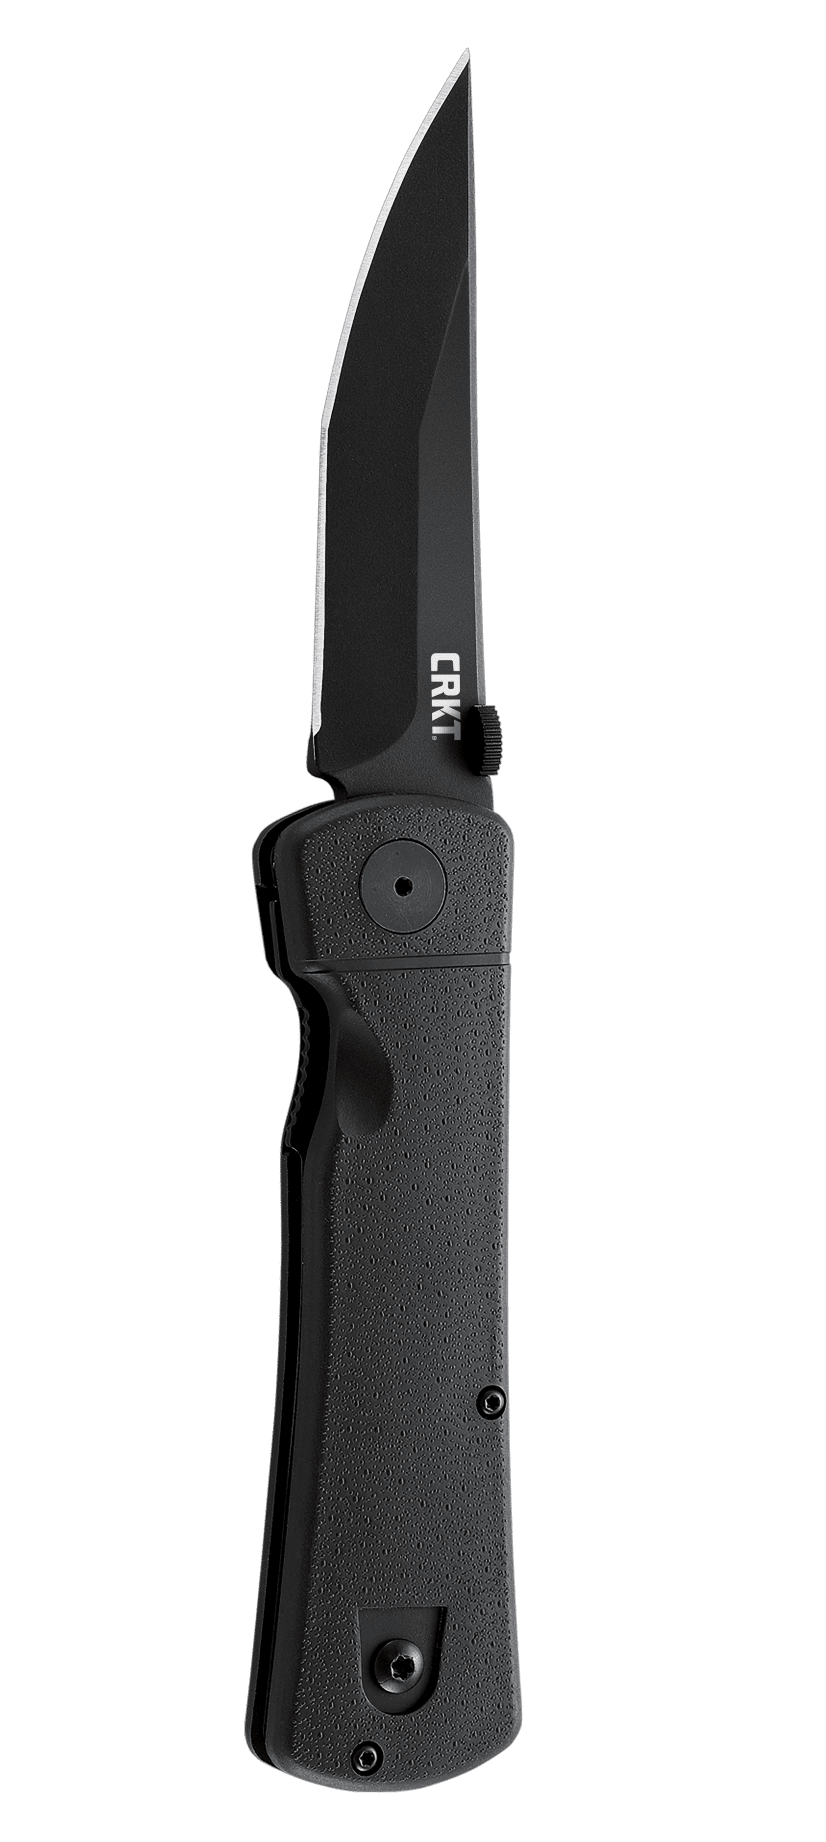 product image for CRKT Black Hissatsu Folder Tactical Knife AUS 8 Stainless Steel Blade 2903